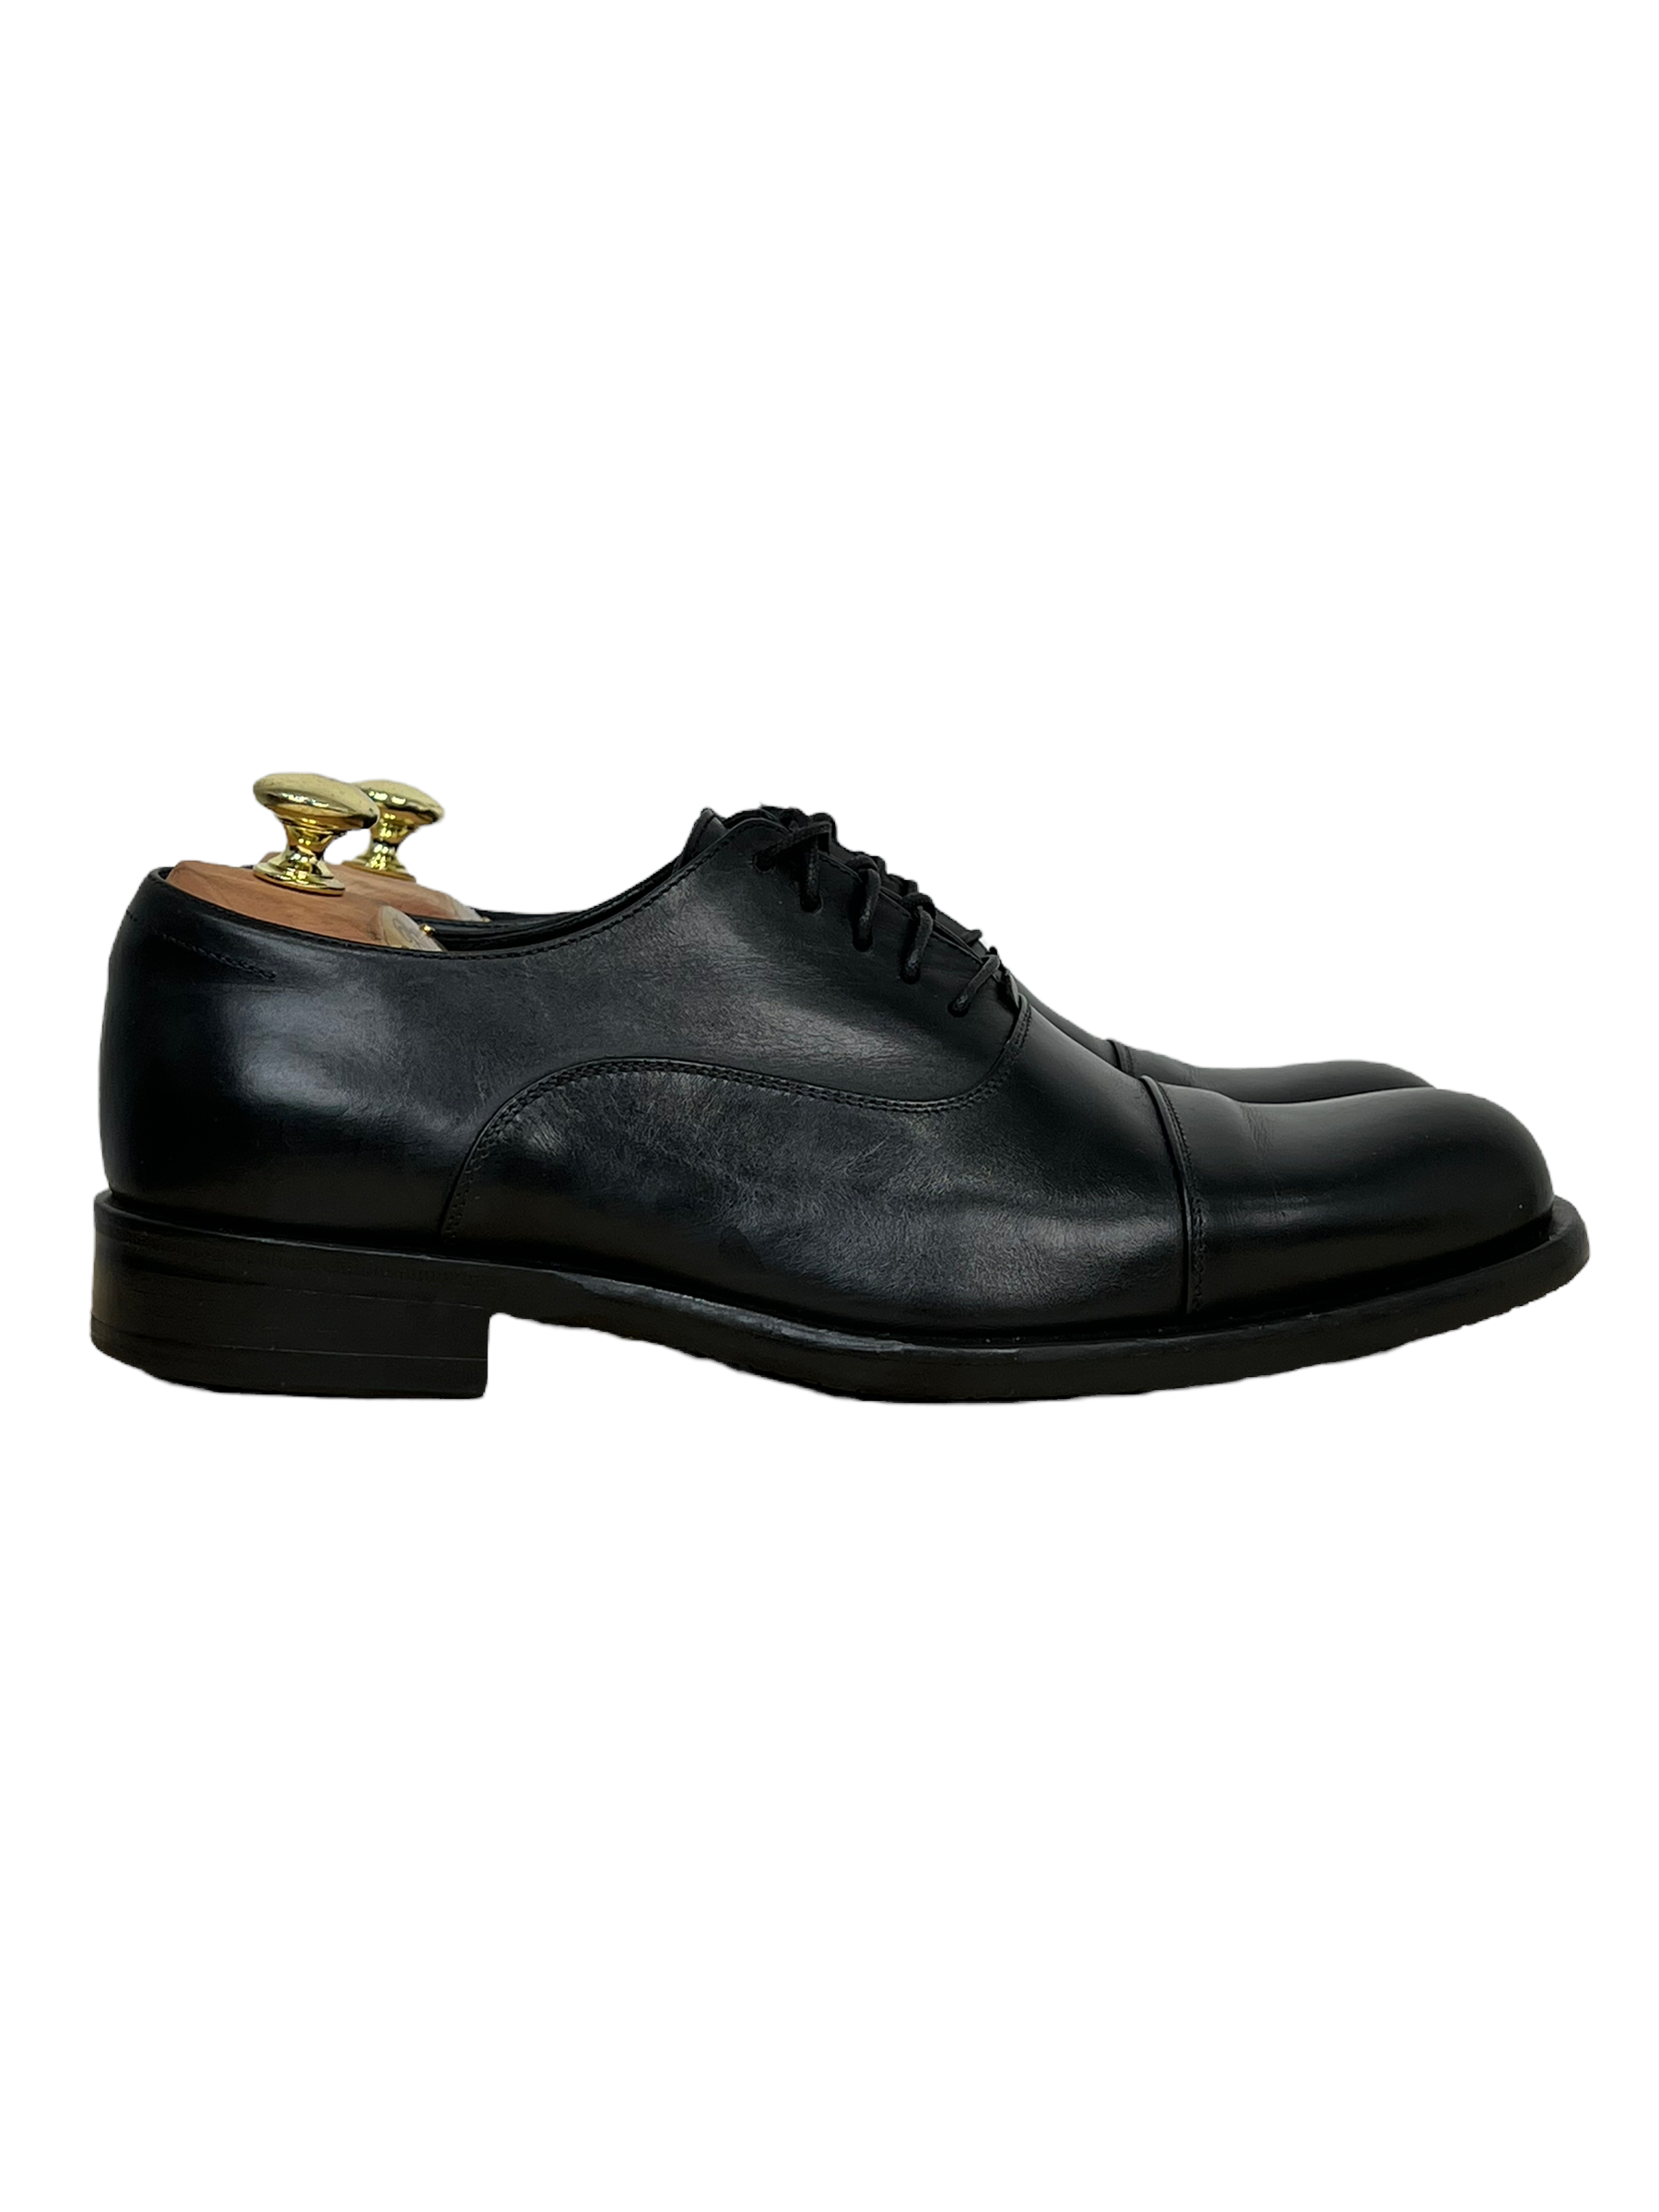 Giorgio Armani Black Leather Cap Toe Oxford Dress Shoes - Genuine Design Luxury Consignment for Men. New & Pre-Owned Clothing, Shoes, & Accessories. Calgary, Canada